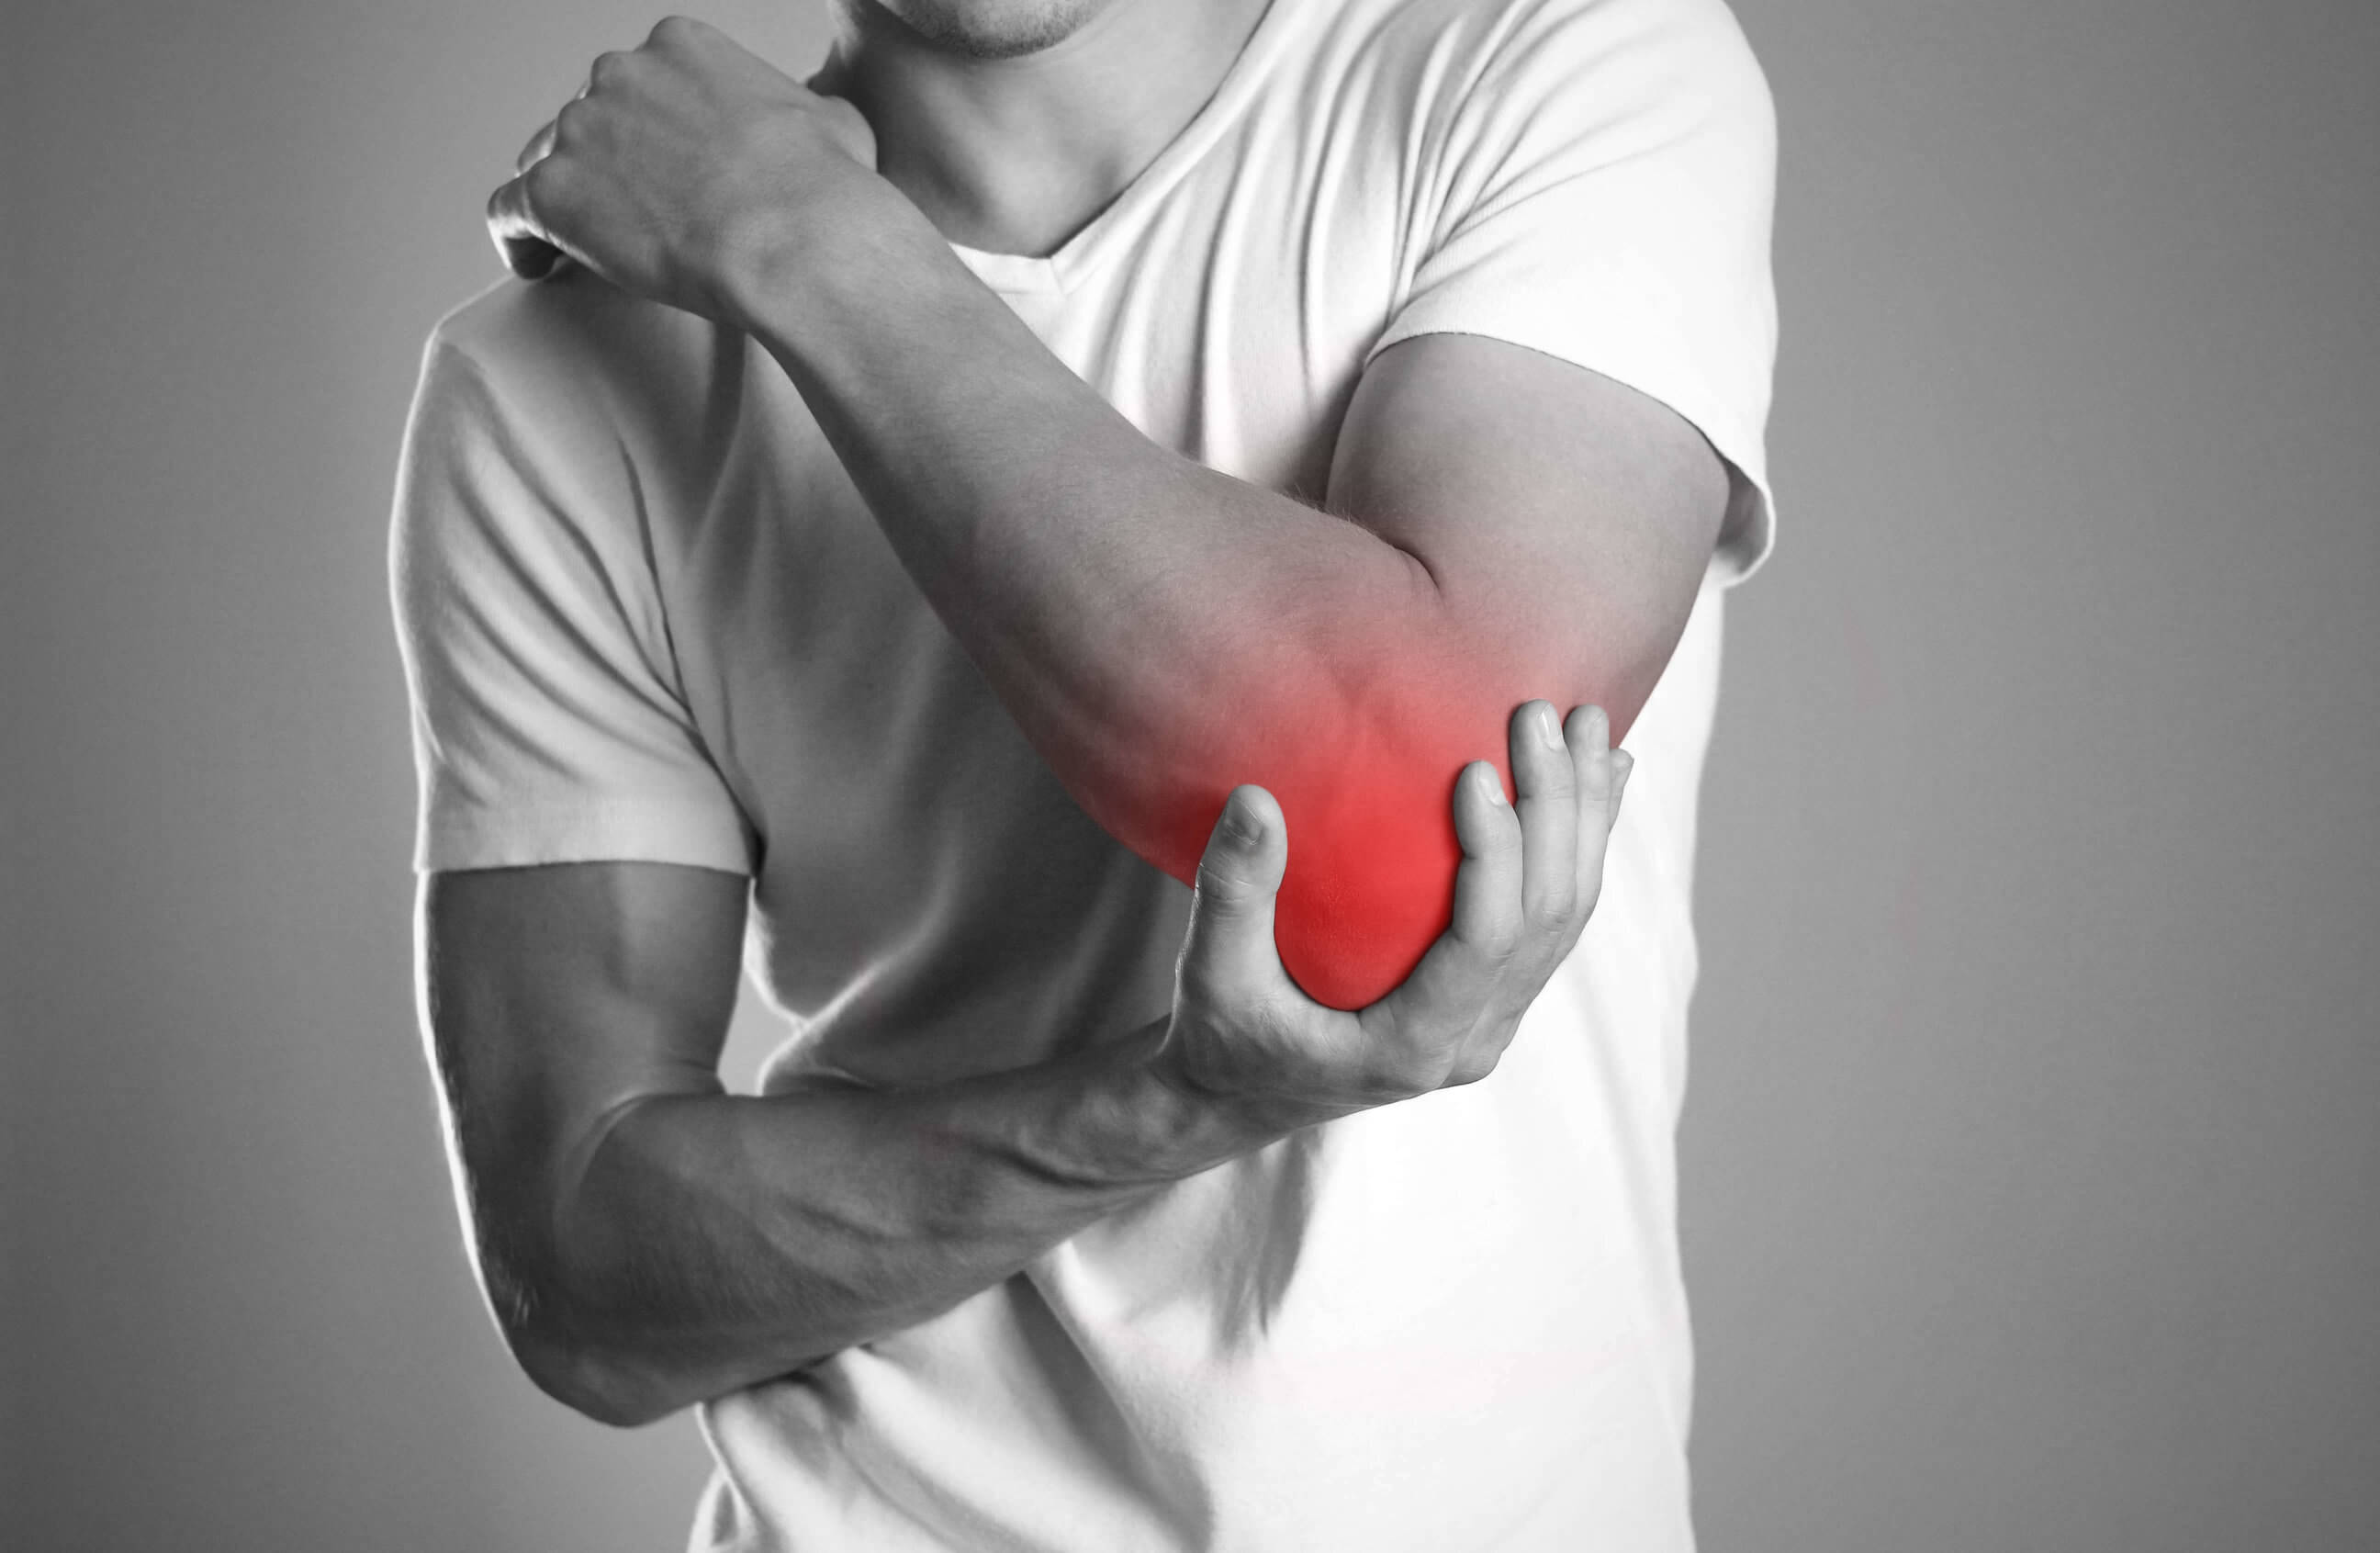 Tennis Elbow Treatment Management | Get Treated With Jipsi